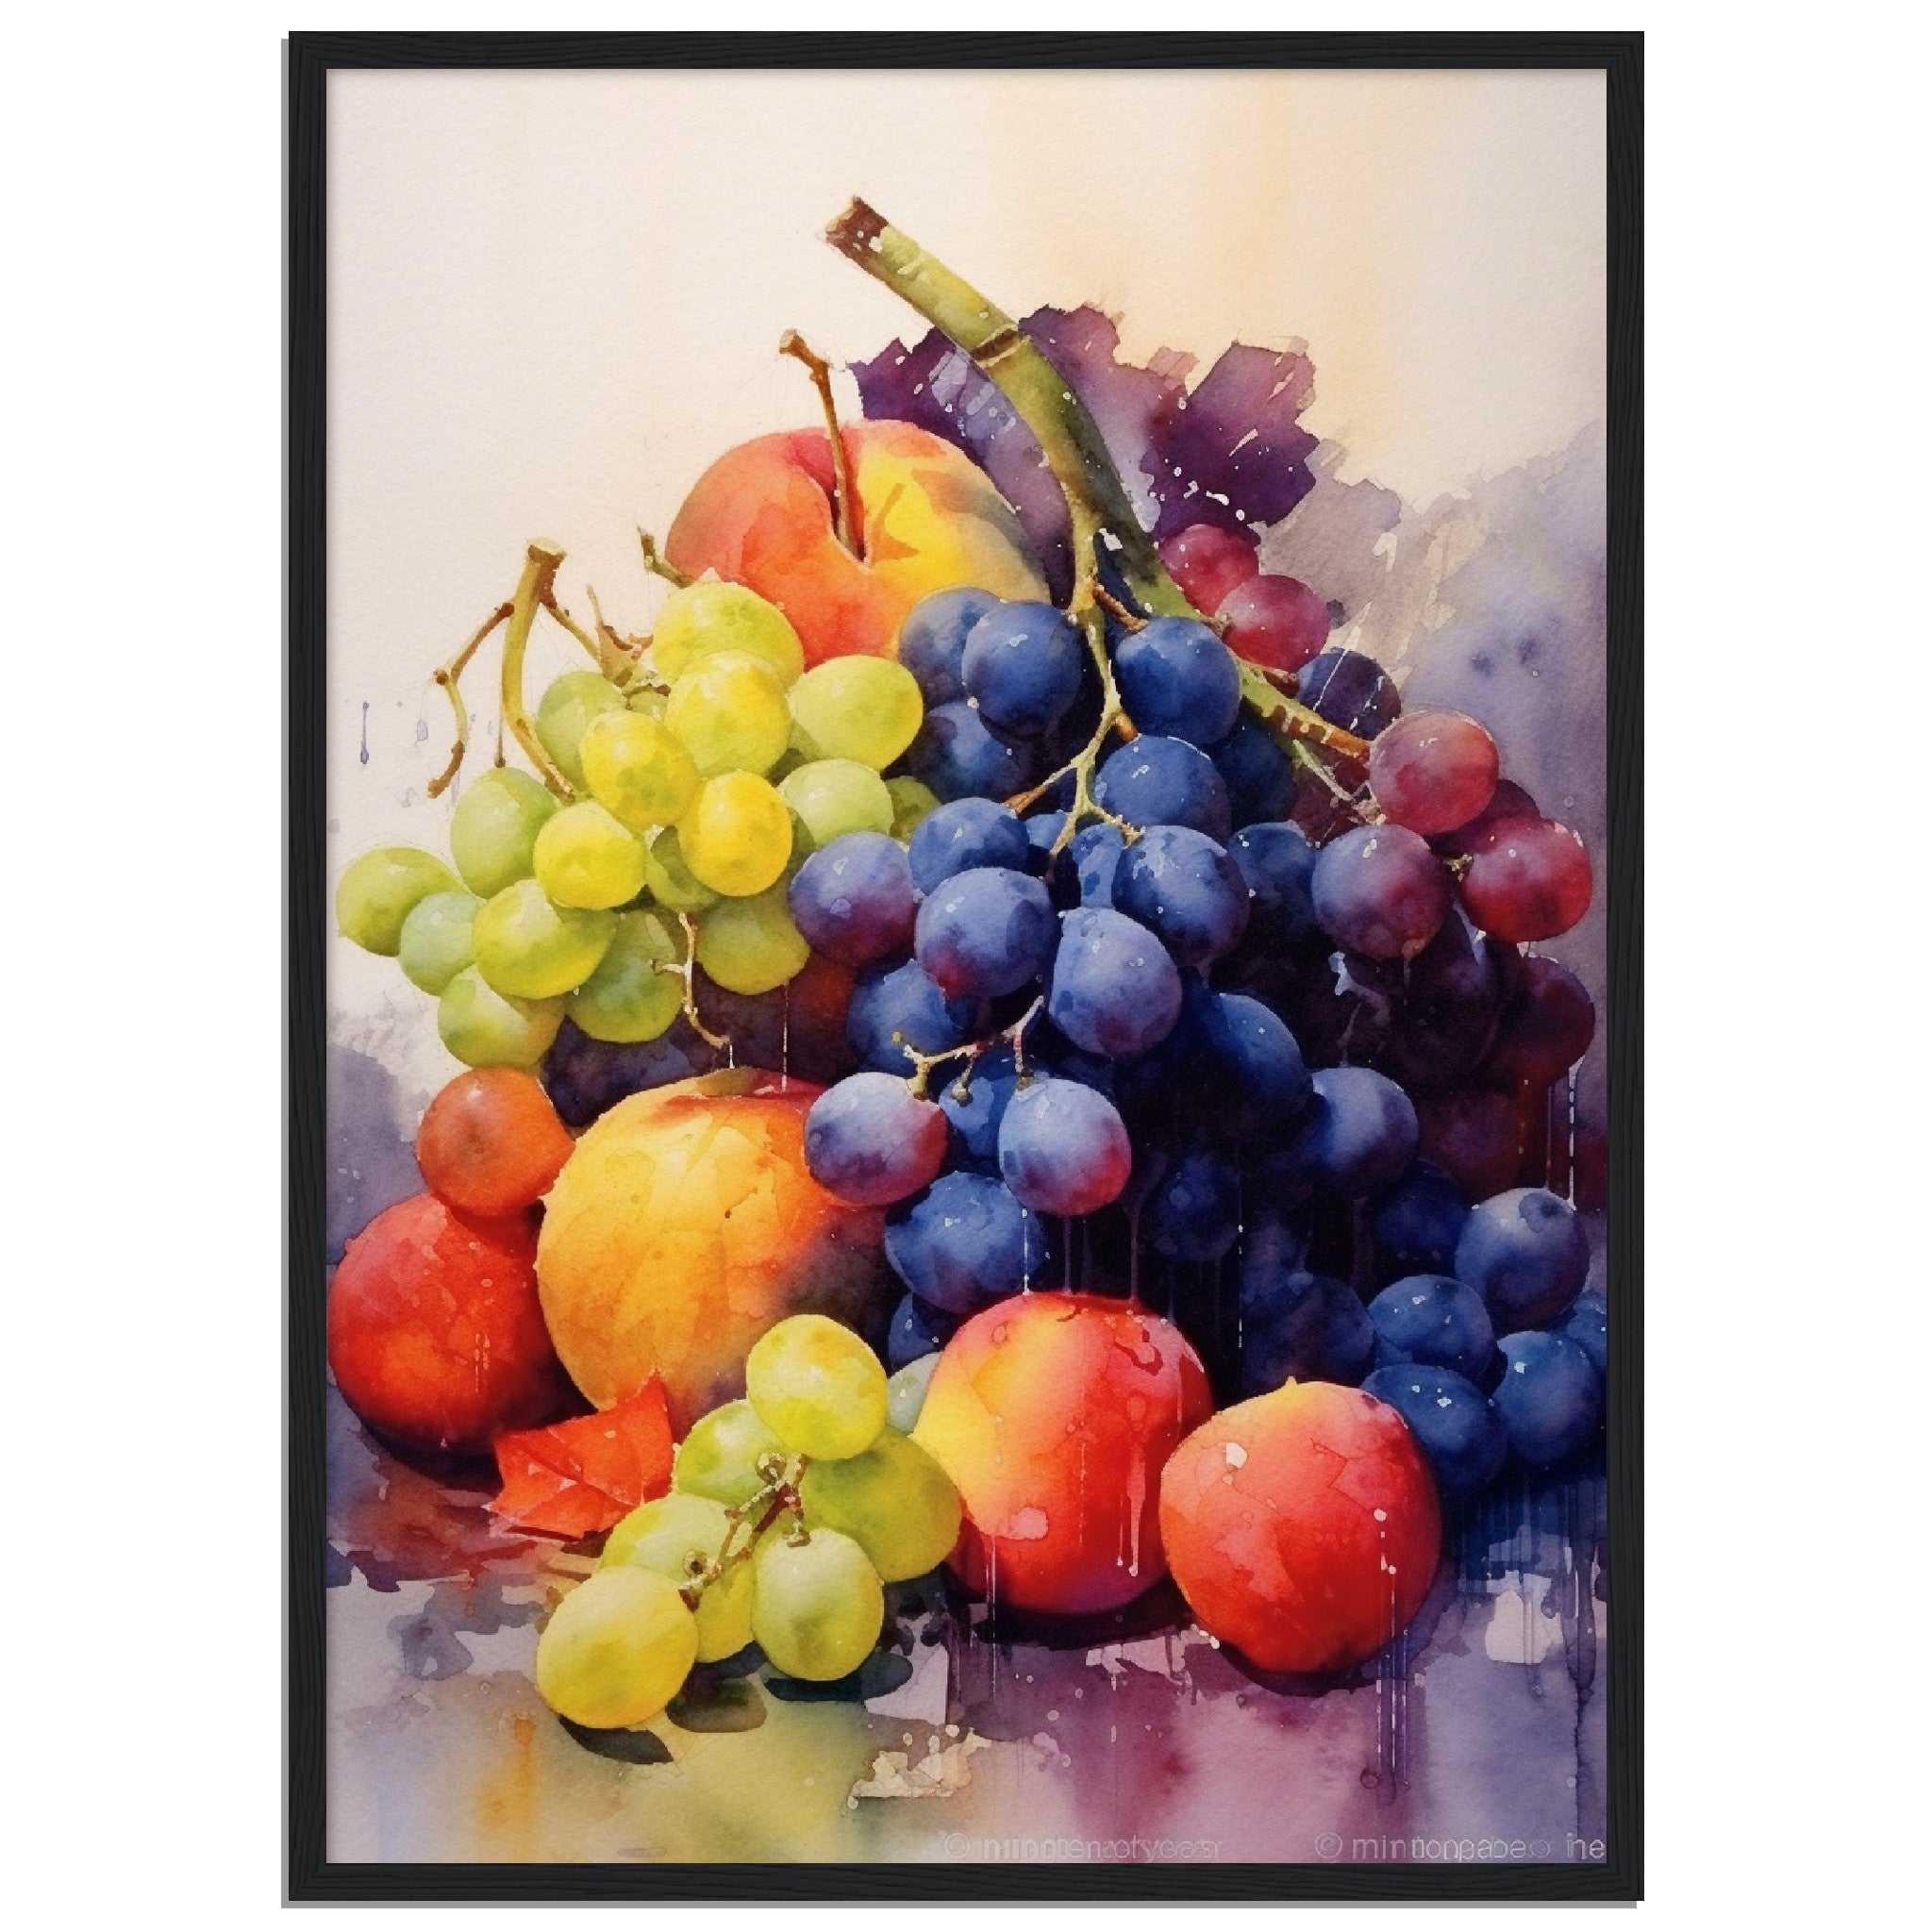 Water Colour Collection Of Colourful Fruits - immersiarts